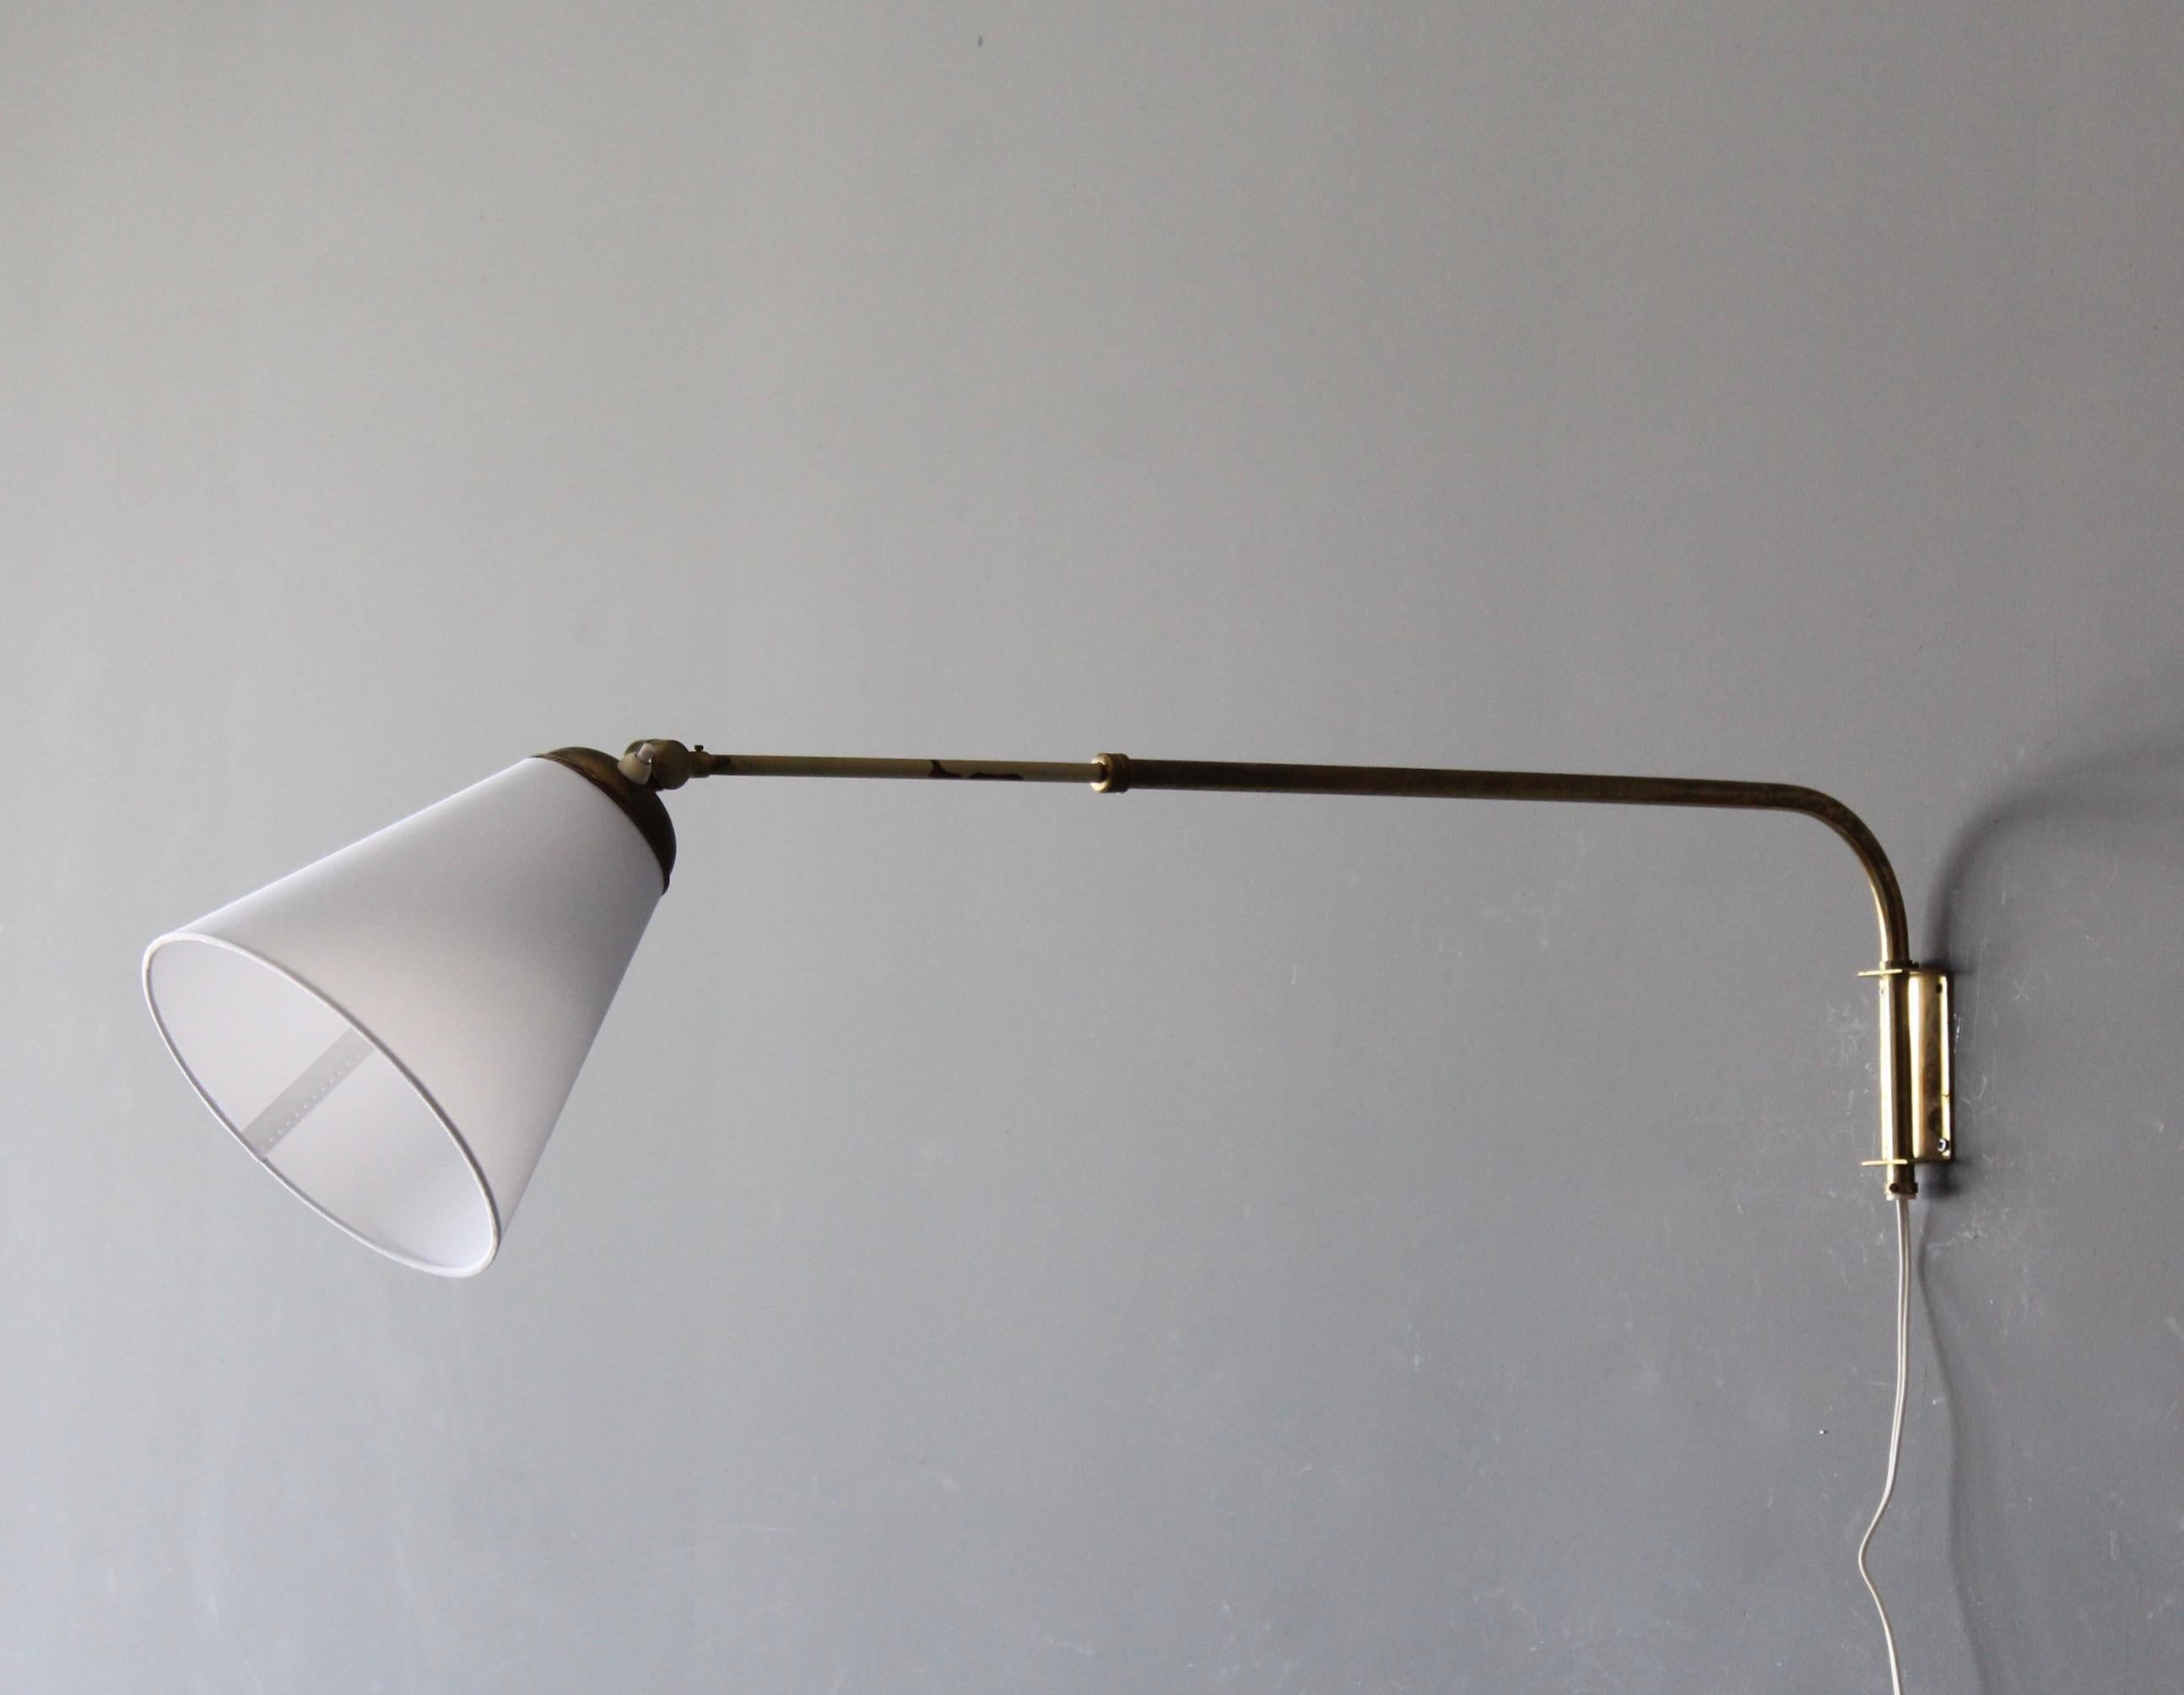 A functionalist wall light / task light, designed and produced in Sweden, 1940s-1950s. Features brass. Brand new fabric lampshade. With telescopic arm.

Takes one lightbulb on E27 socket. No stated max wattage, not UL listed. Constructed for